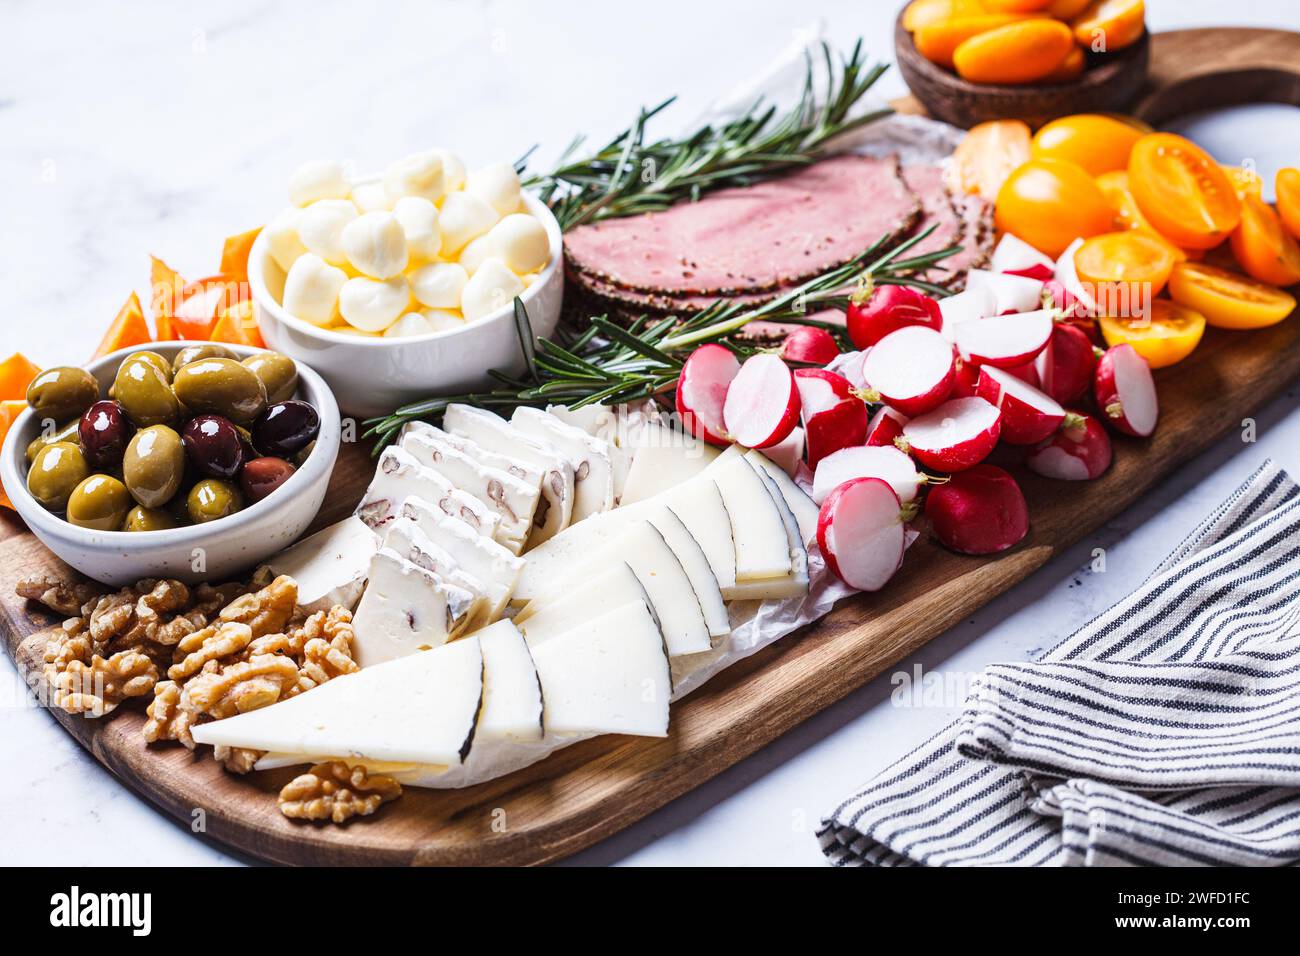 Cheese platter with meat, snacks, vegetables and nuts. Stock Photo